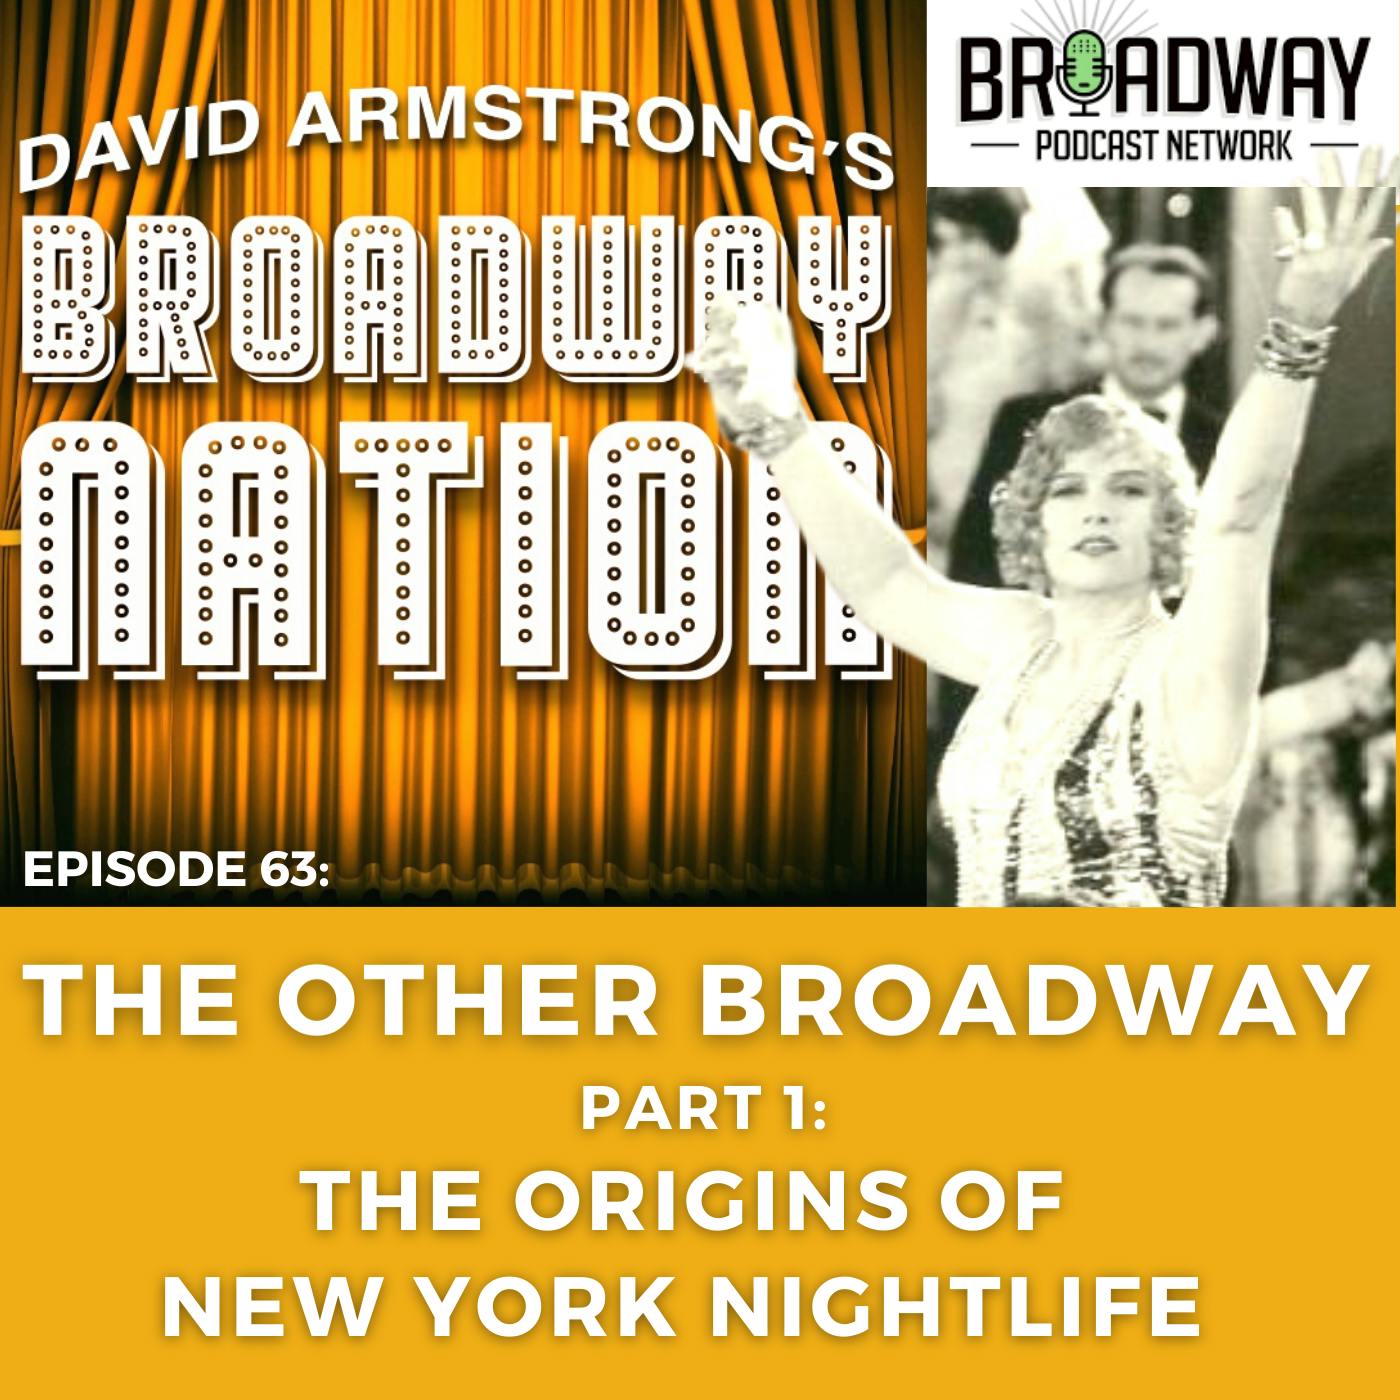 Episode 63: THE OTHER BROADWAY, part 1: The Origins of New York Nightlife Image